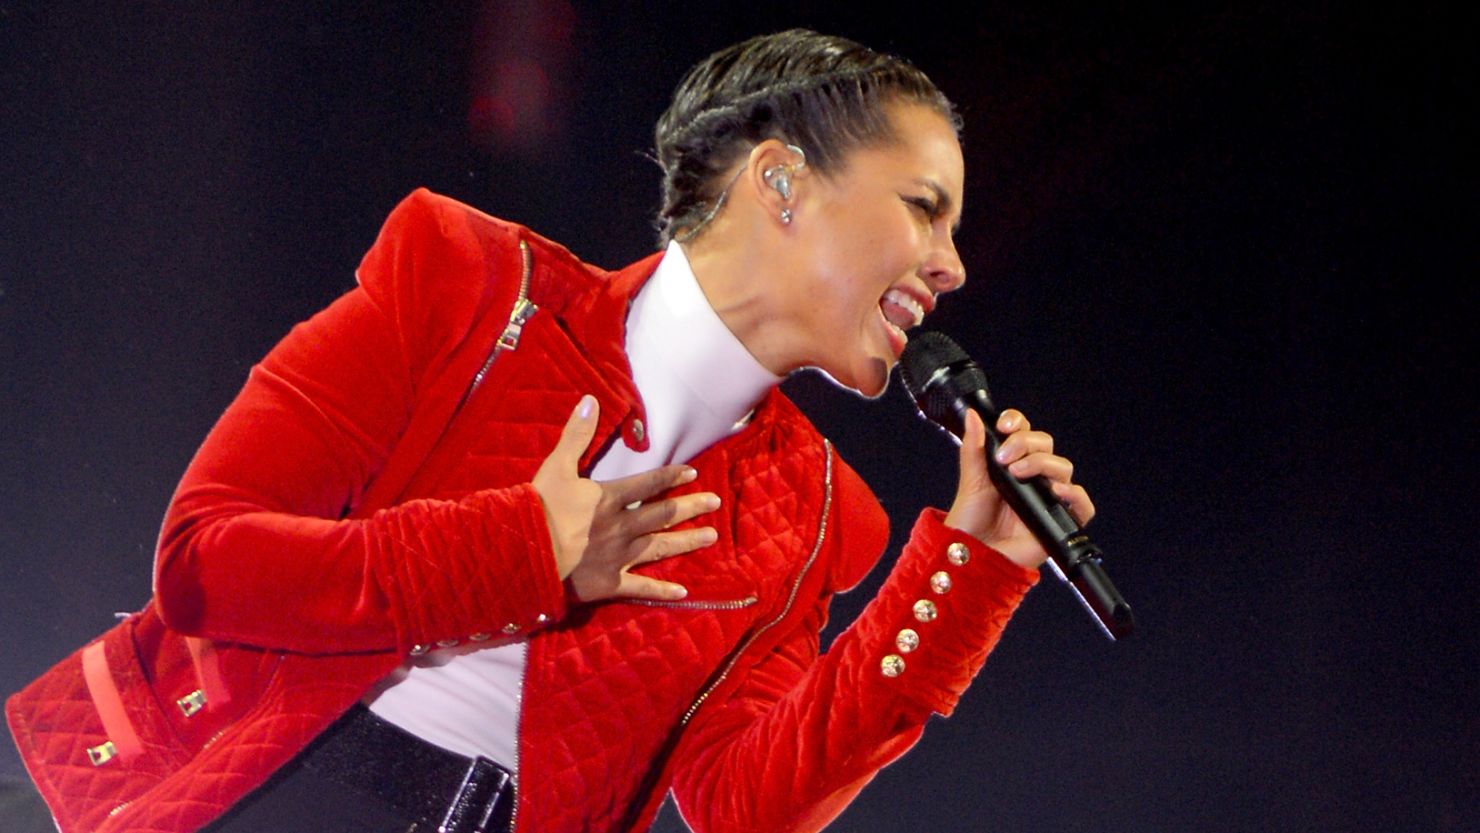 "We can't act like it's not happening," Alicia Keys says of HIV. "We have to make sure we know that we're all at risk."